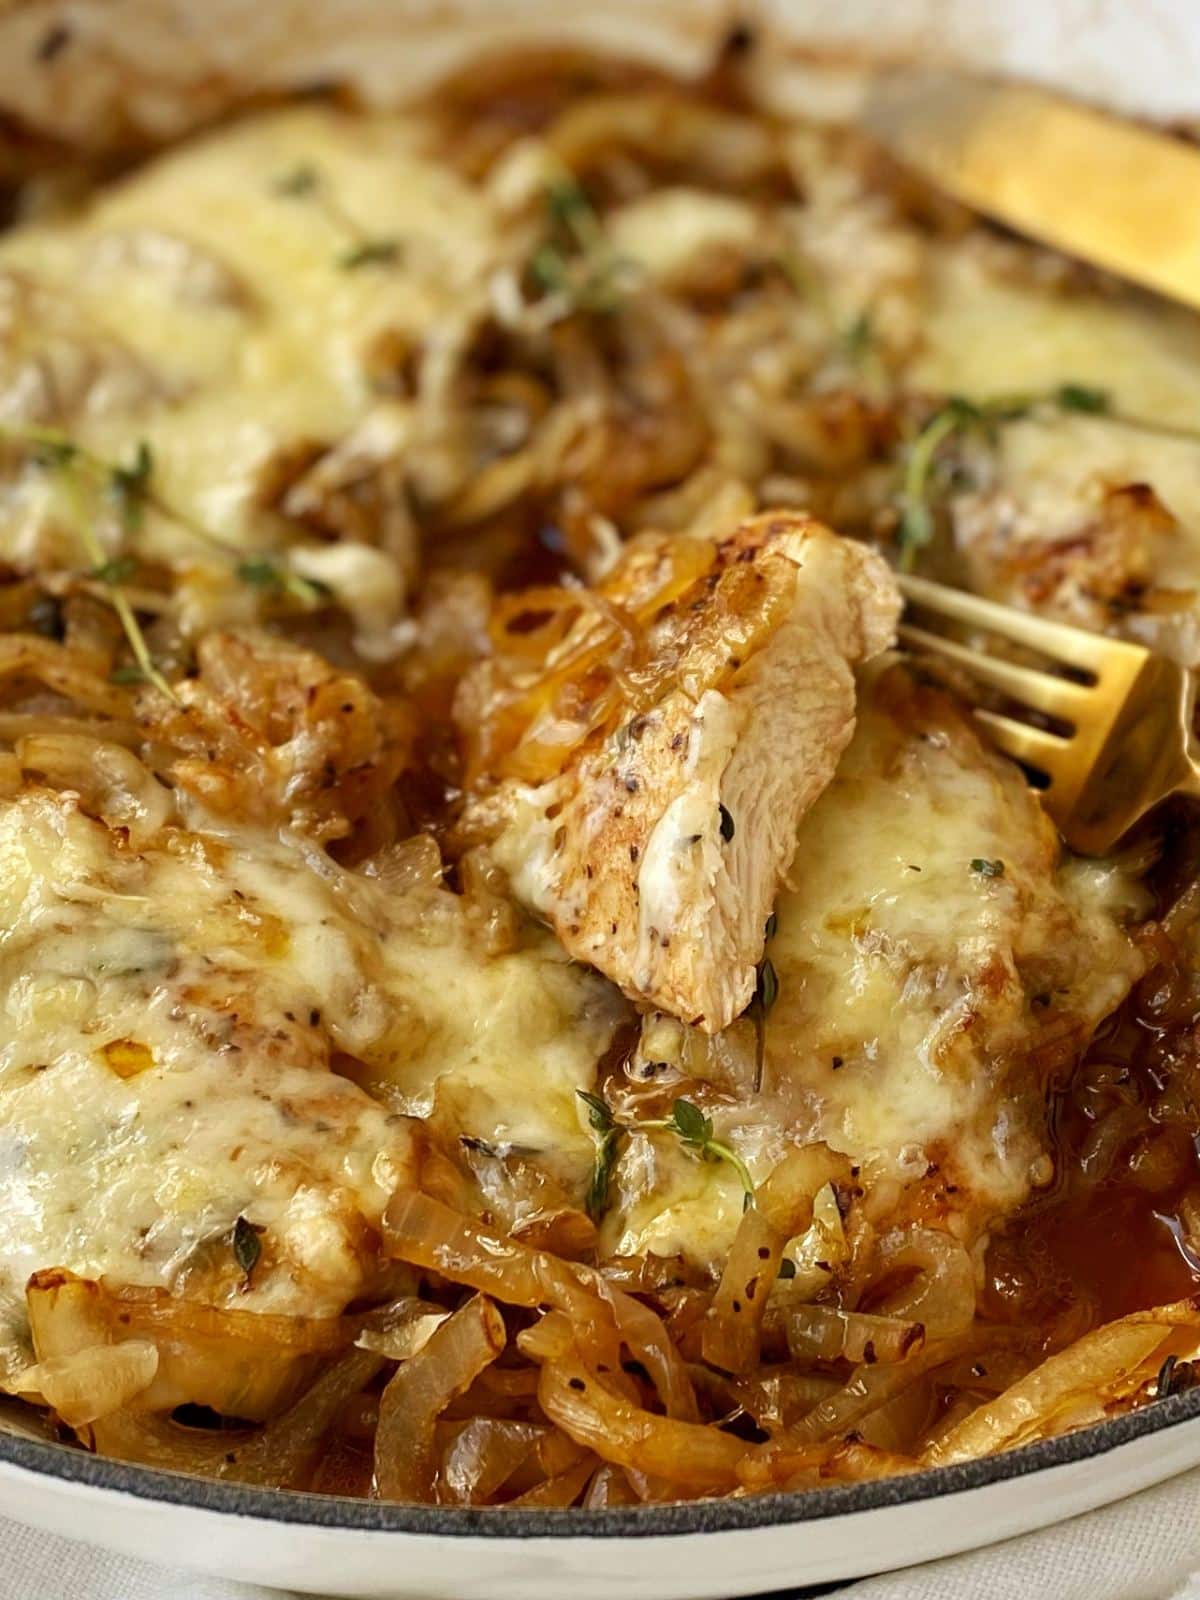 close up of sliced chicken in skillet with onions and melted cheese.